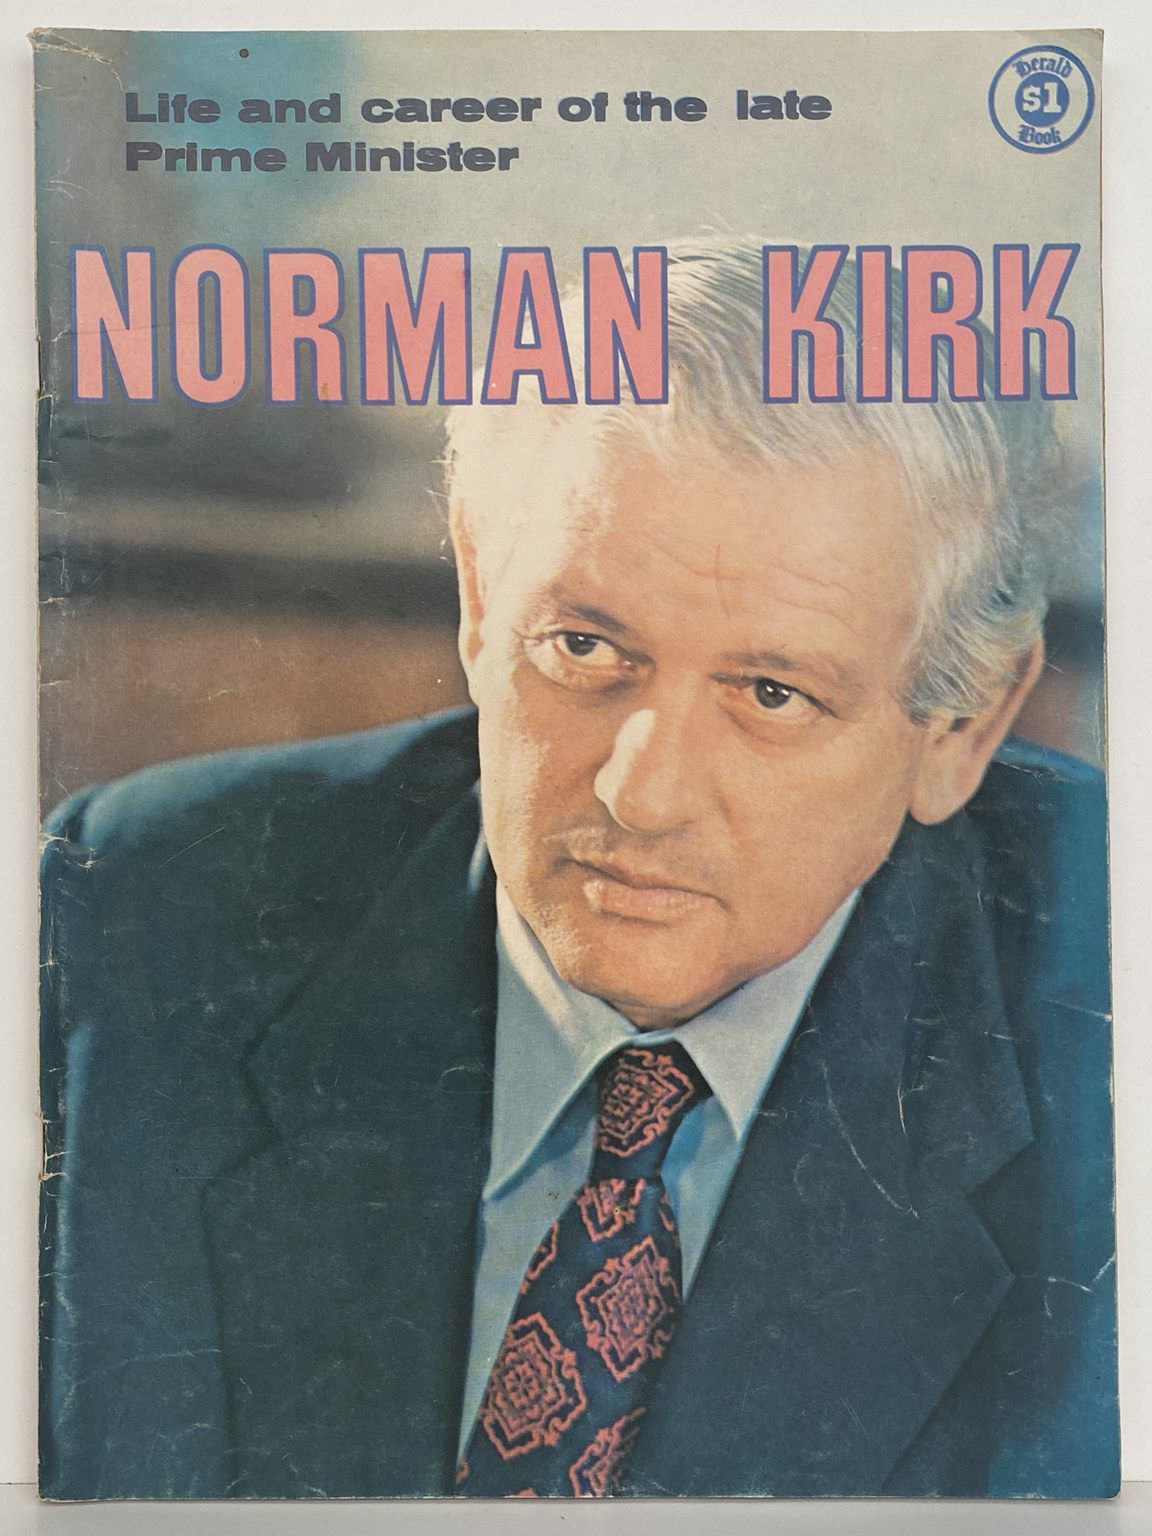 VINTAGE MAGAZINE: Norman Kirk - Life and Career of a Prime Minister